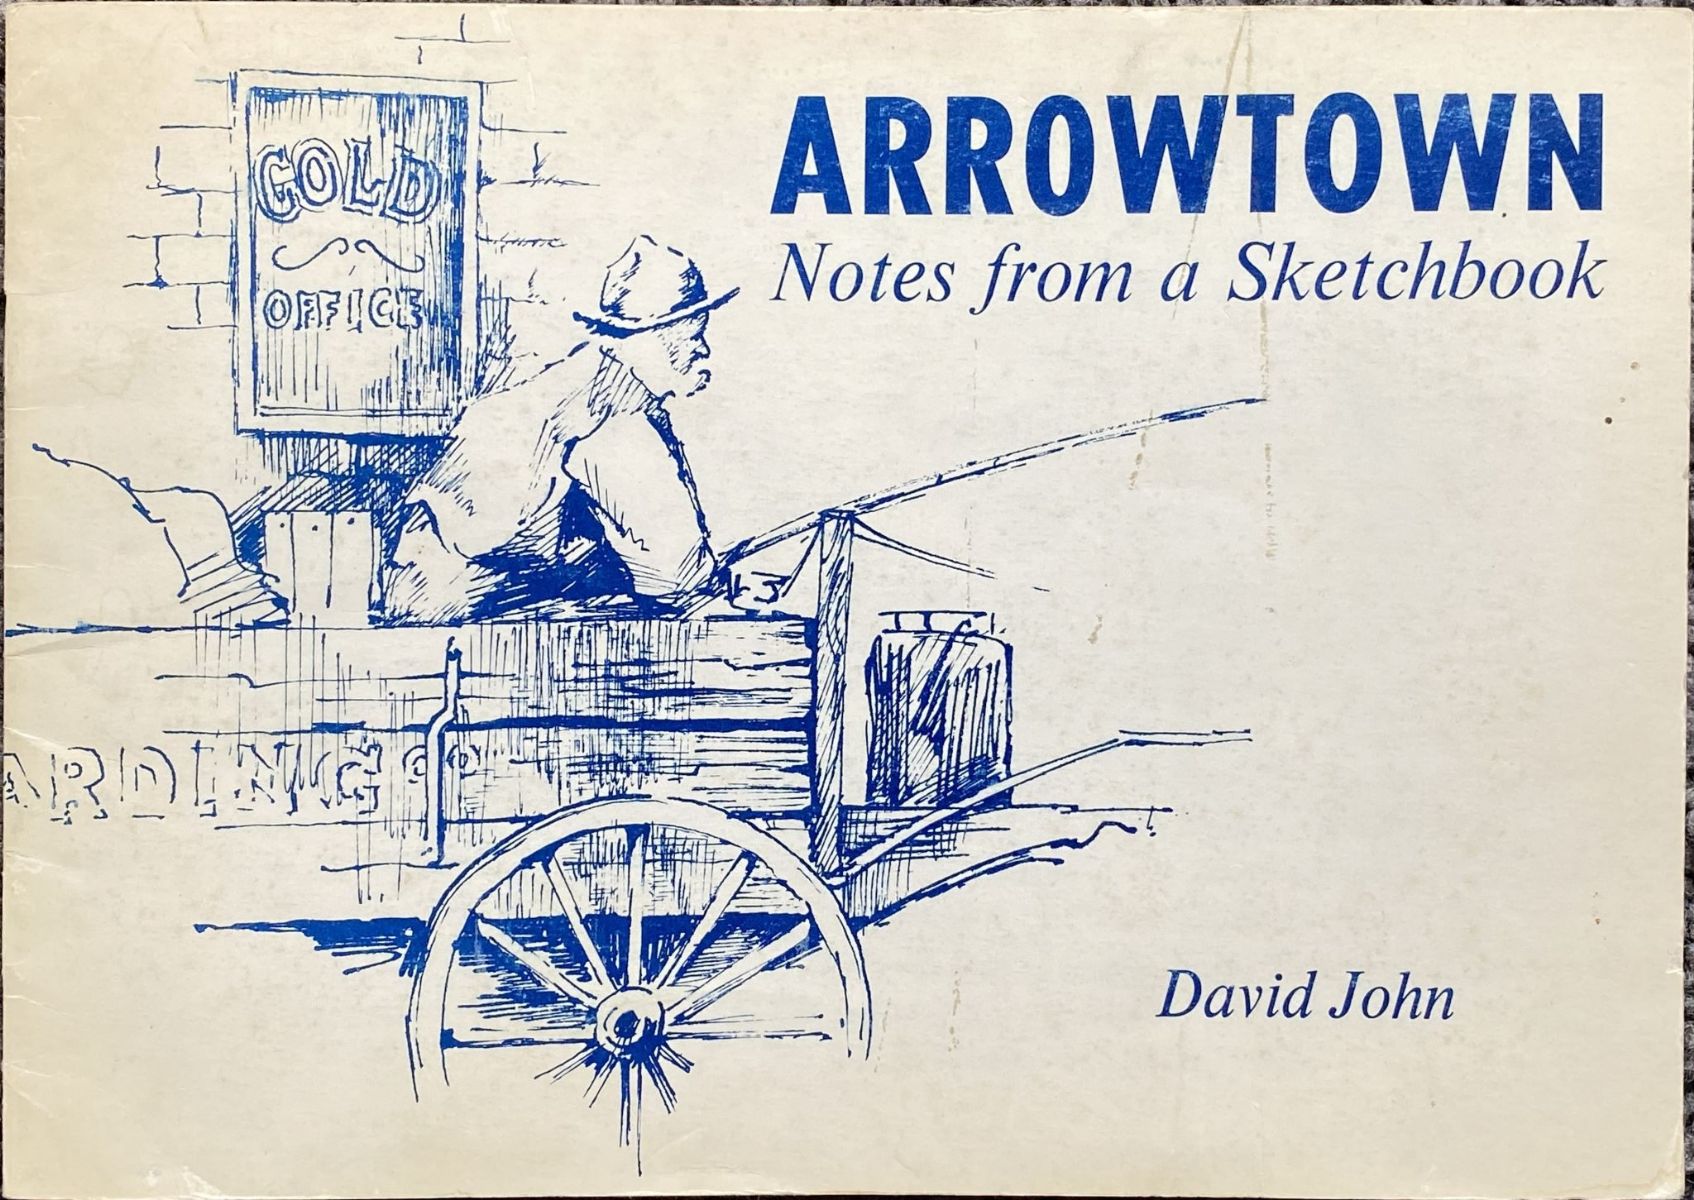 ARROWTOWN Notes from a Sketchbook